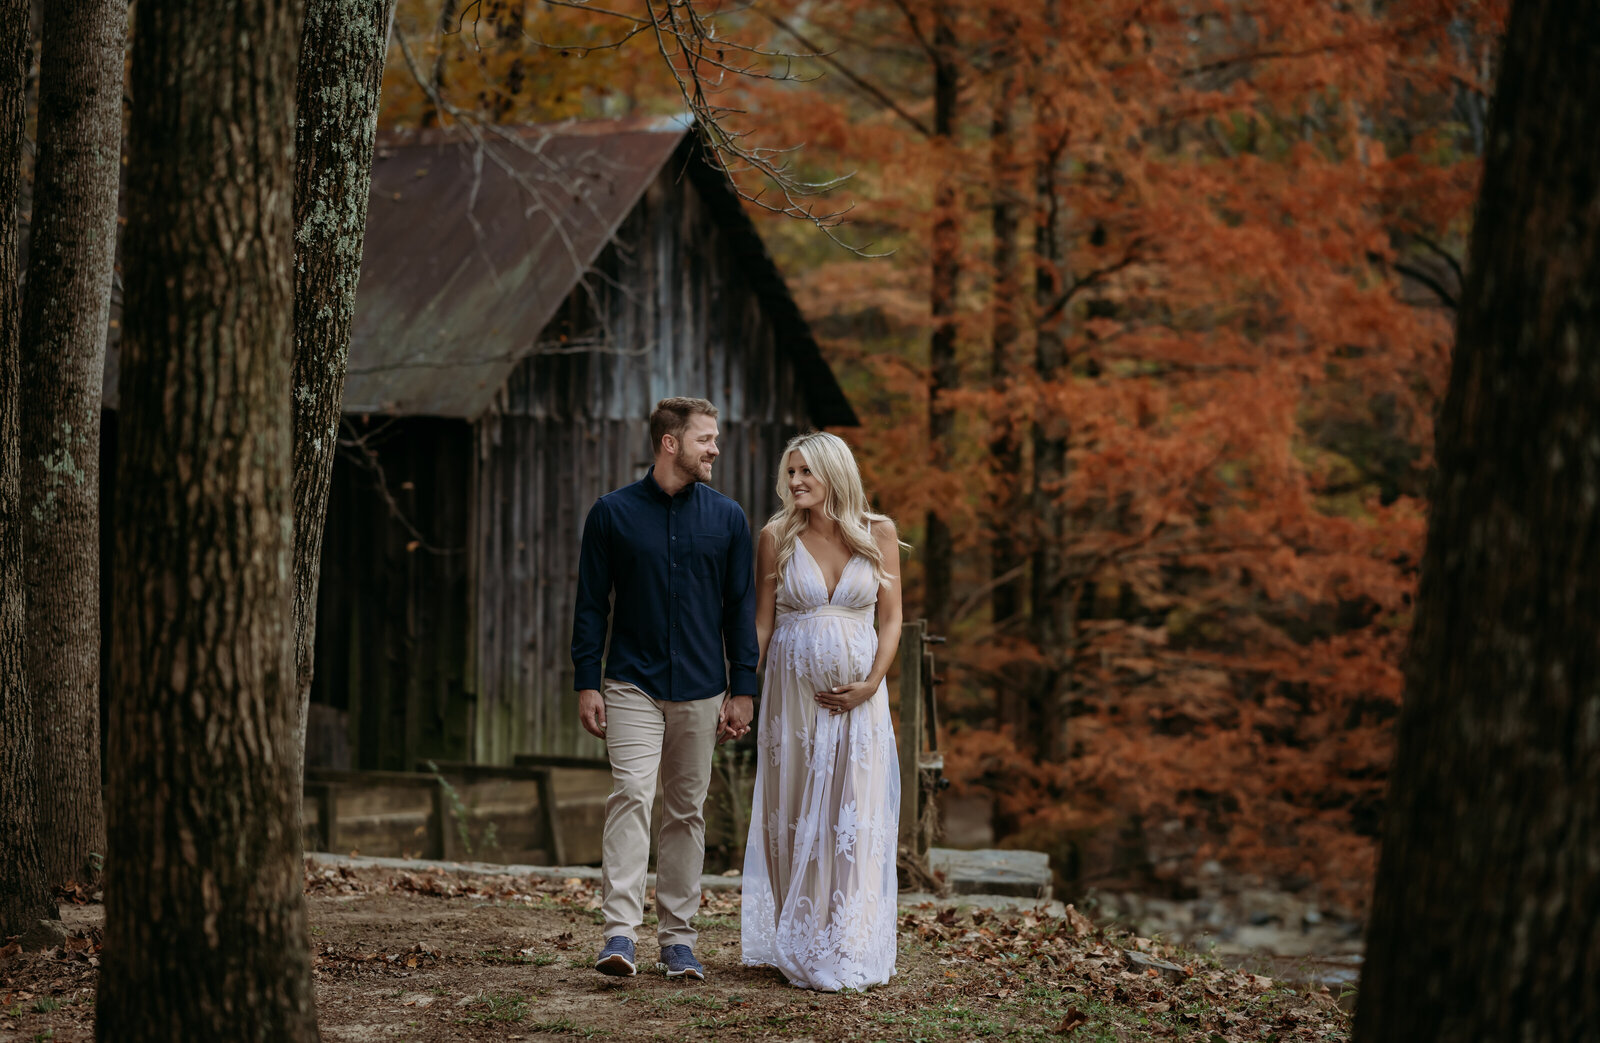 photoshoot at Grist Mill